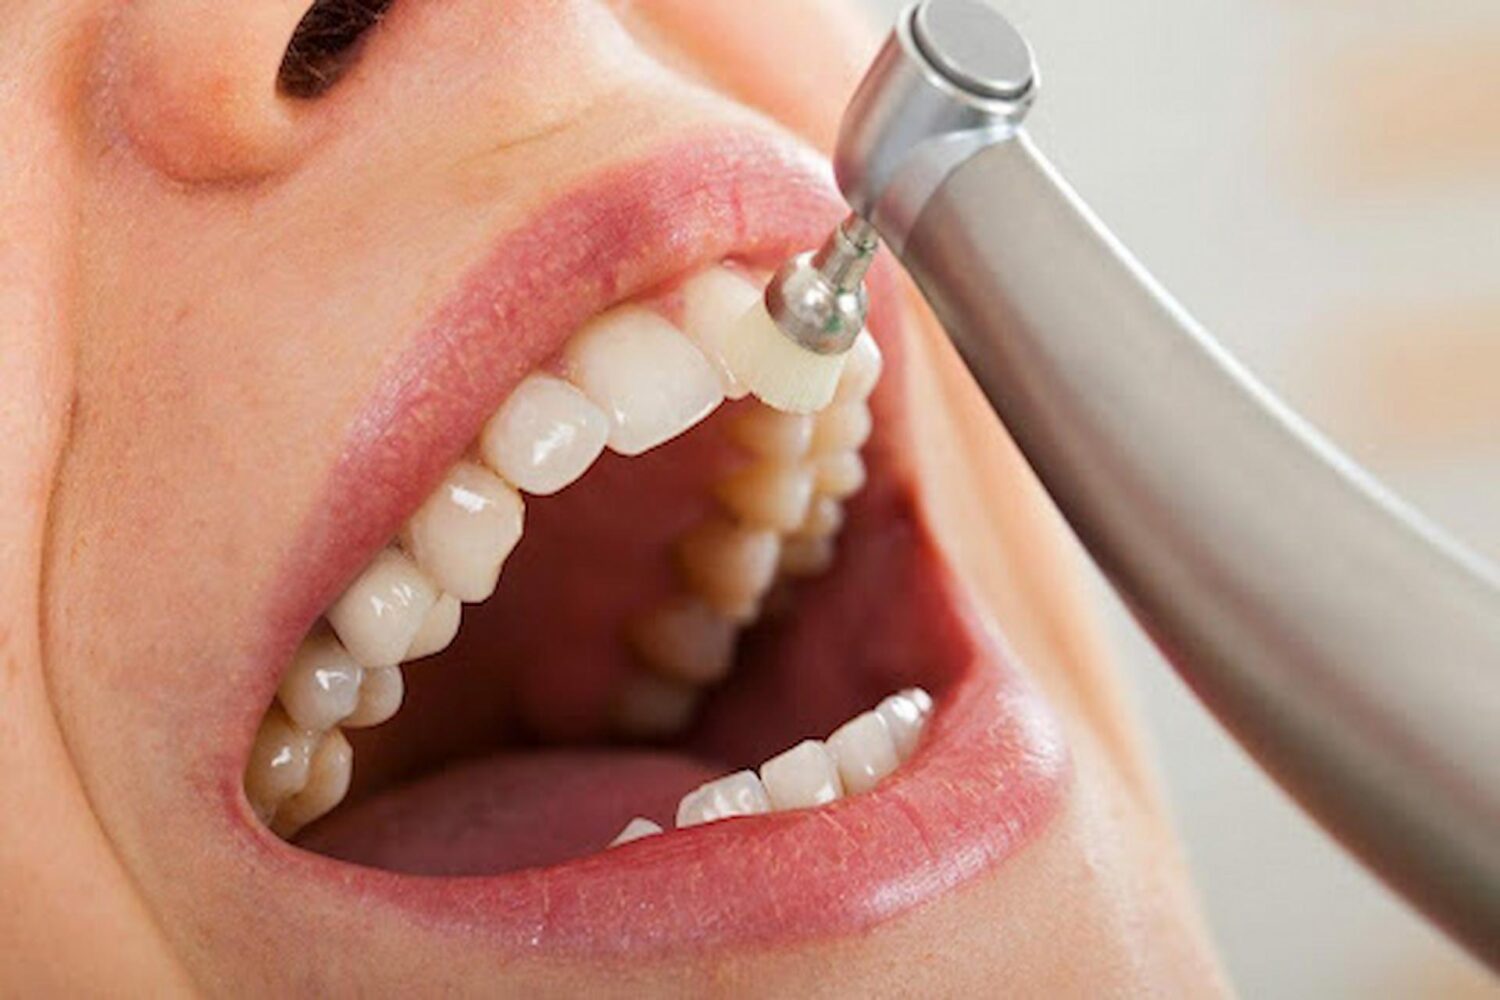 From Stains To Shine: Teeth Whitening And Teeth Cleaning Explained